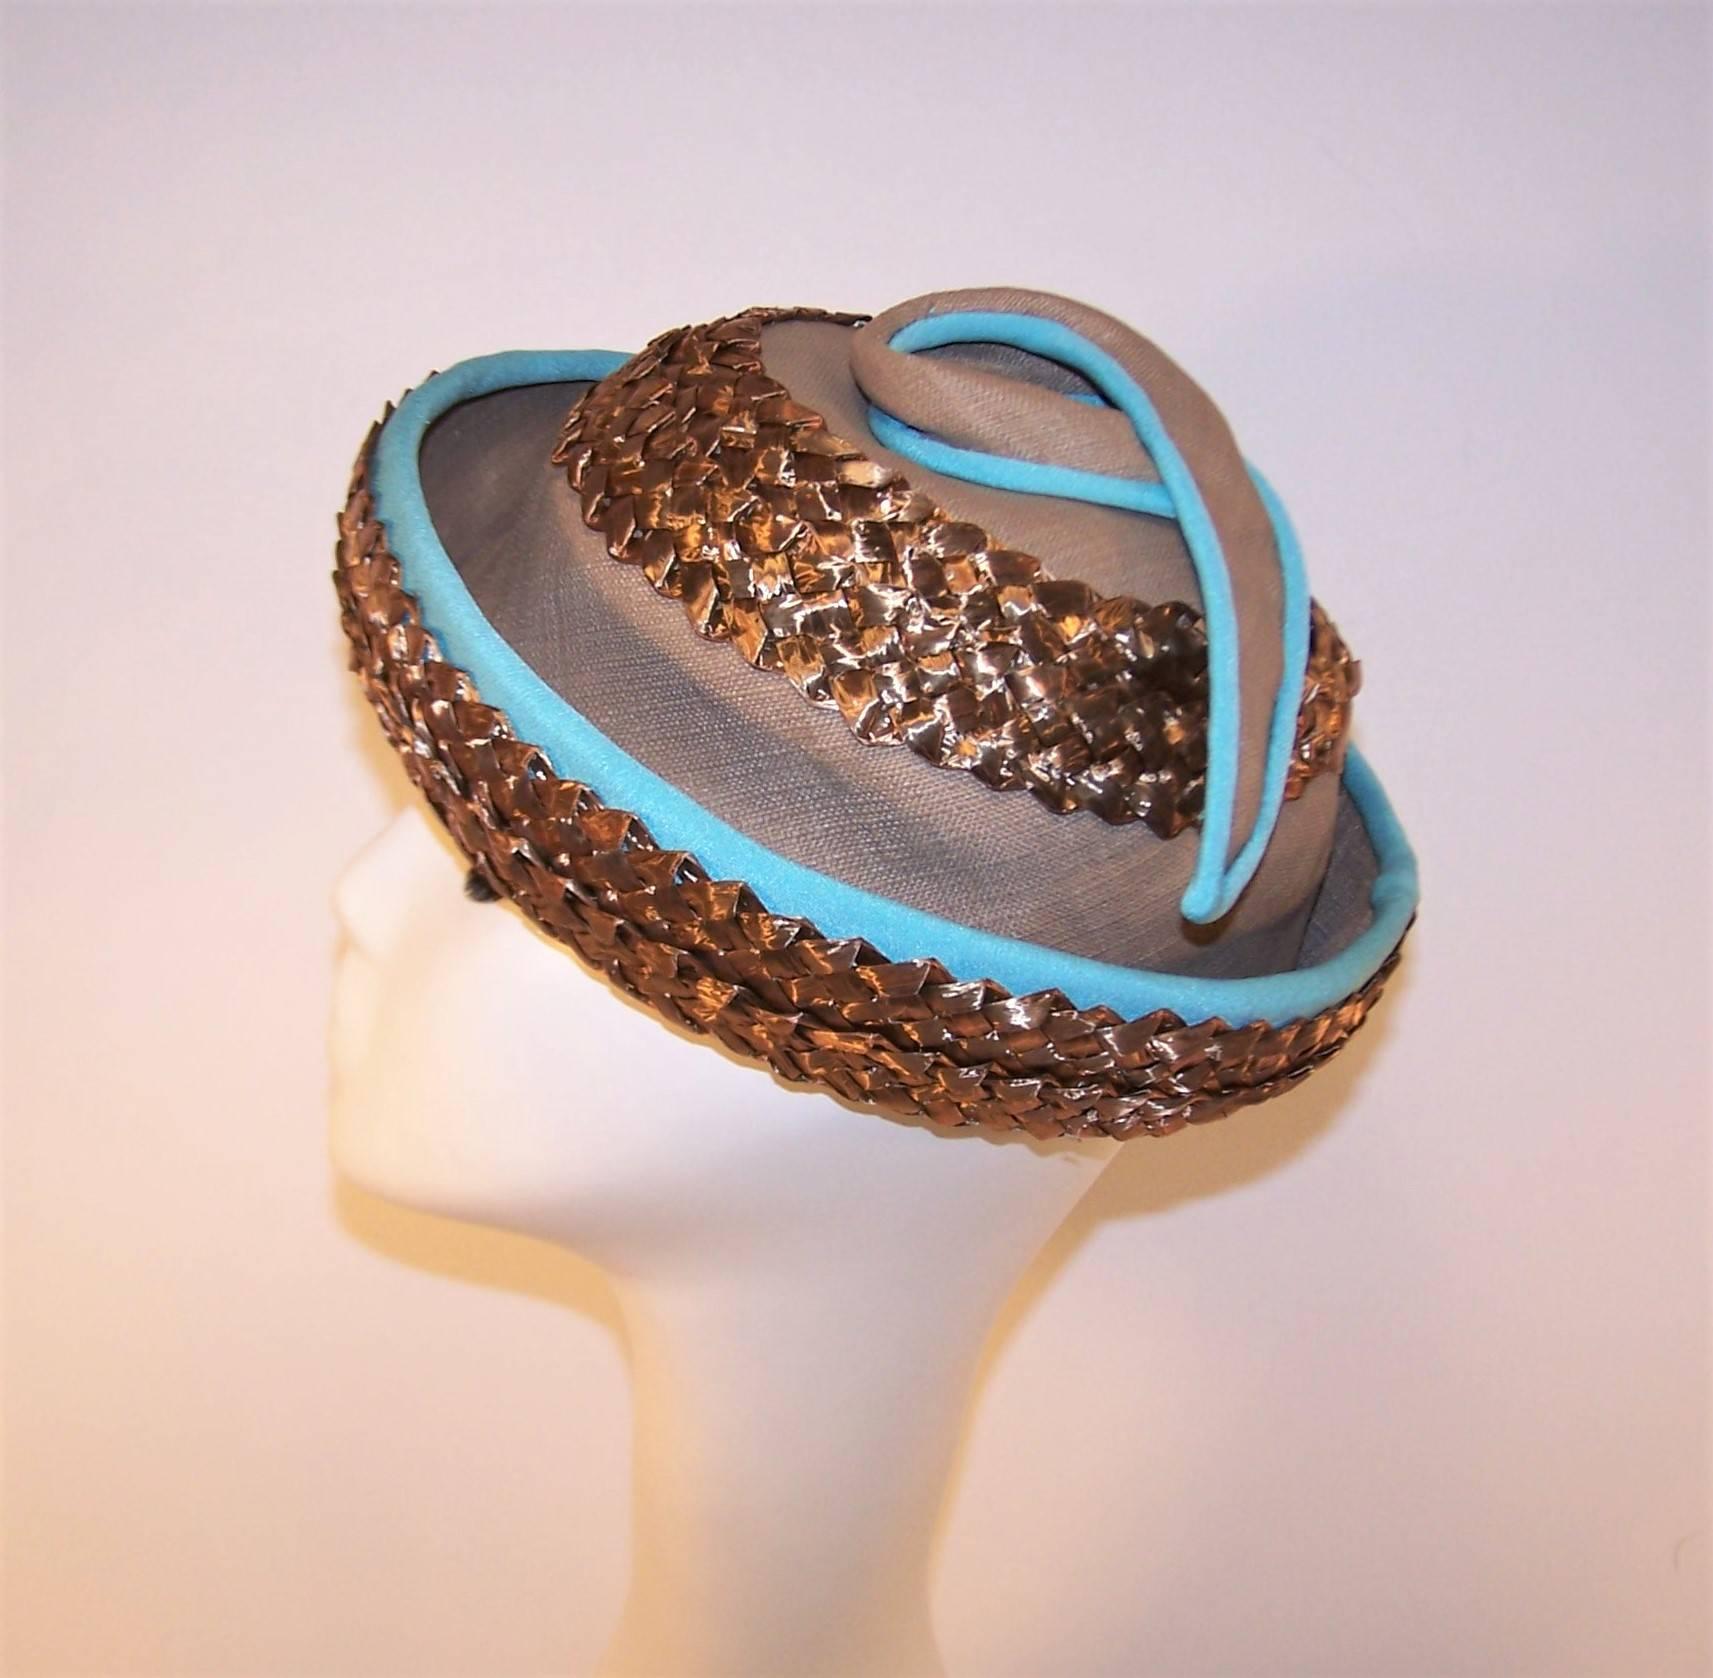 Bonta Creatrice Brown Linen & Straw Hat With Turquoise Details, 1960’s In Good Condition For Sale In Atlanta, GA